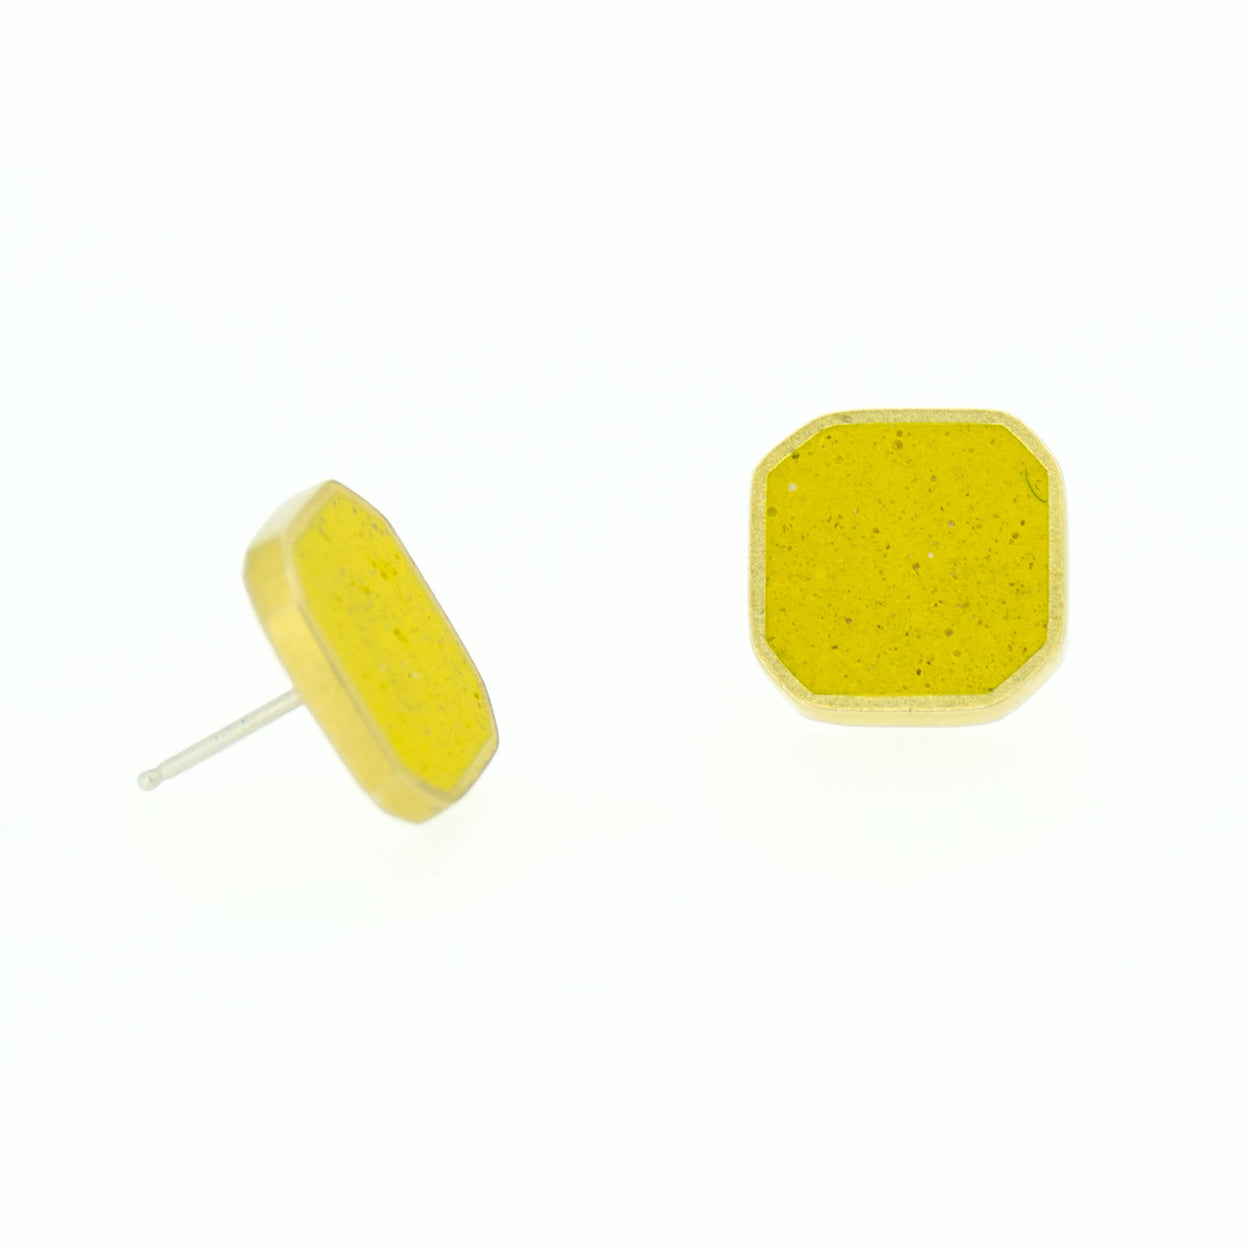 Concrete cluster earrings with yellow pigmented concrete in a brass octagon shaped setting